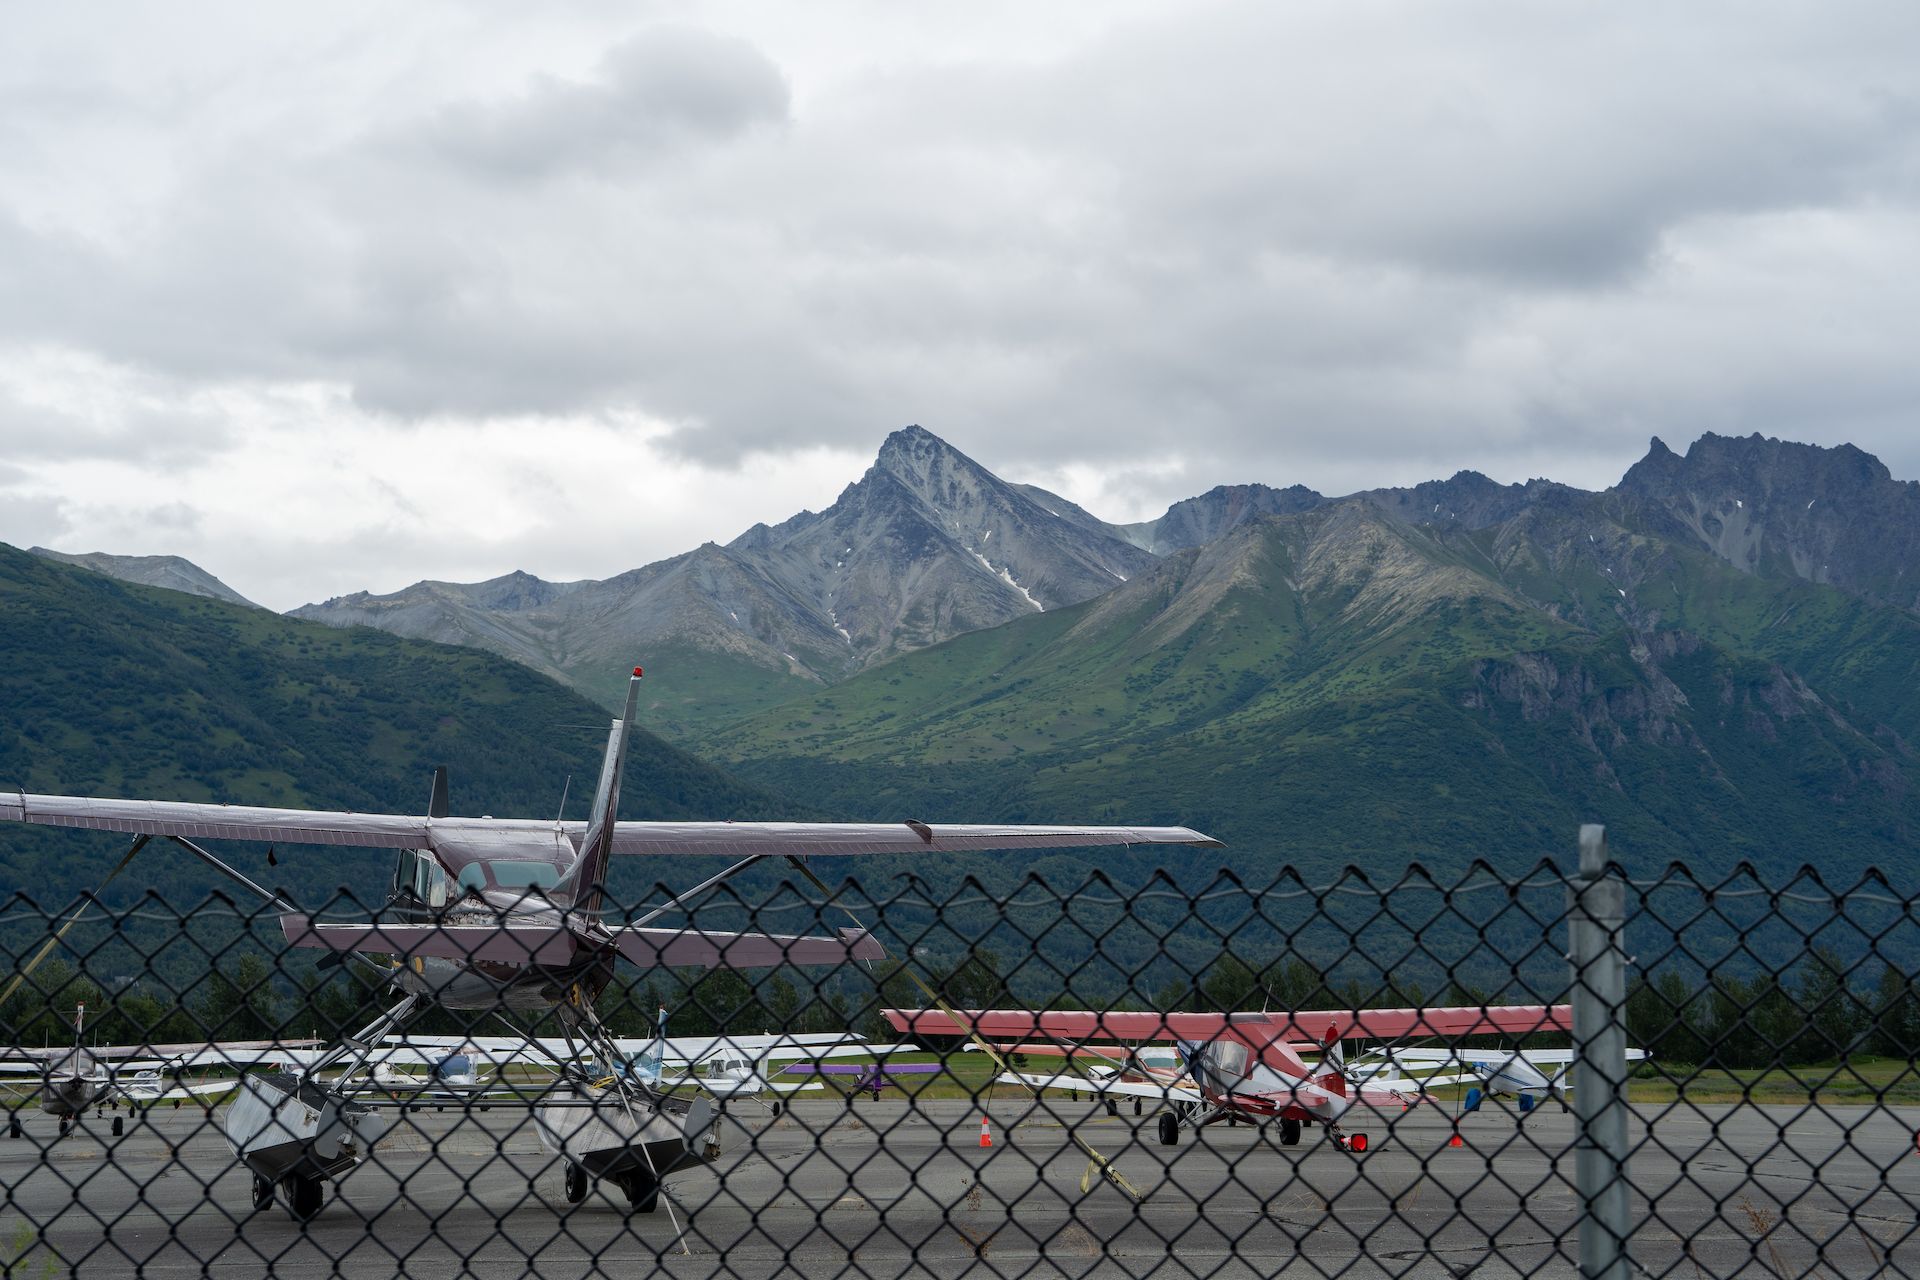 View of the mountains around Palmer from the local airport